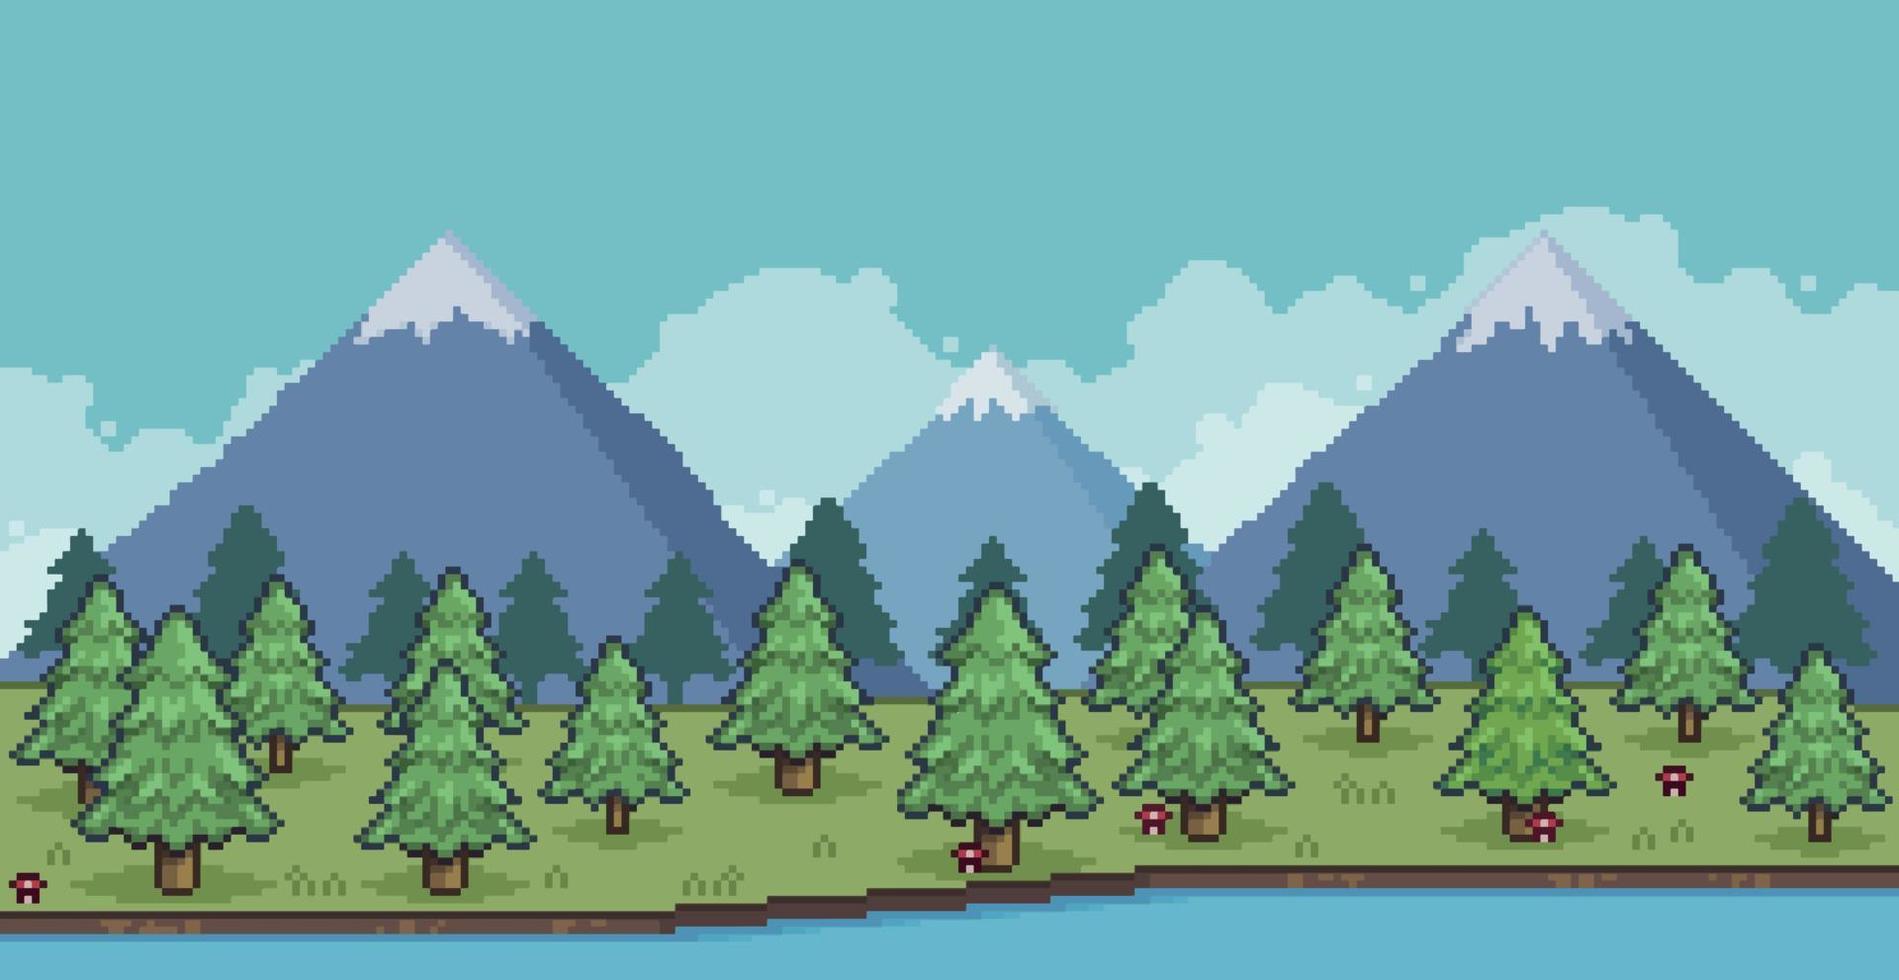 Pixel art landscape of pine forest in the mountains with lake and clouds 8 bit game background vector